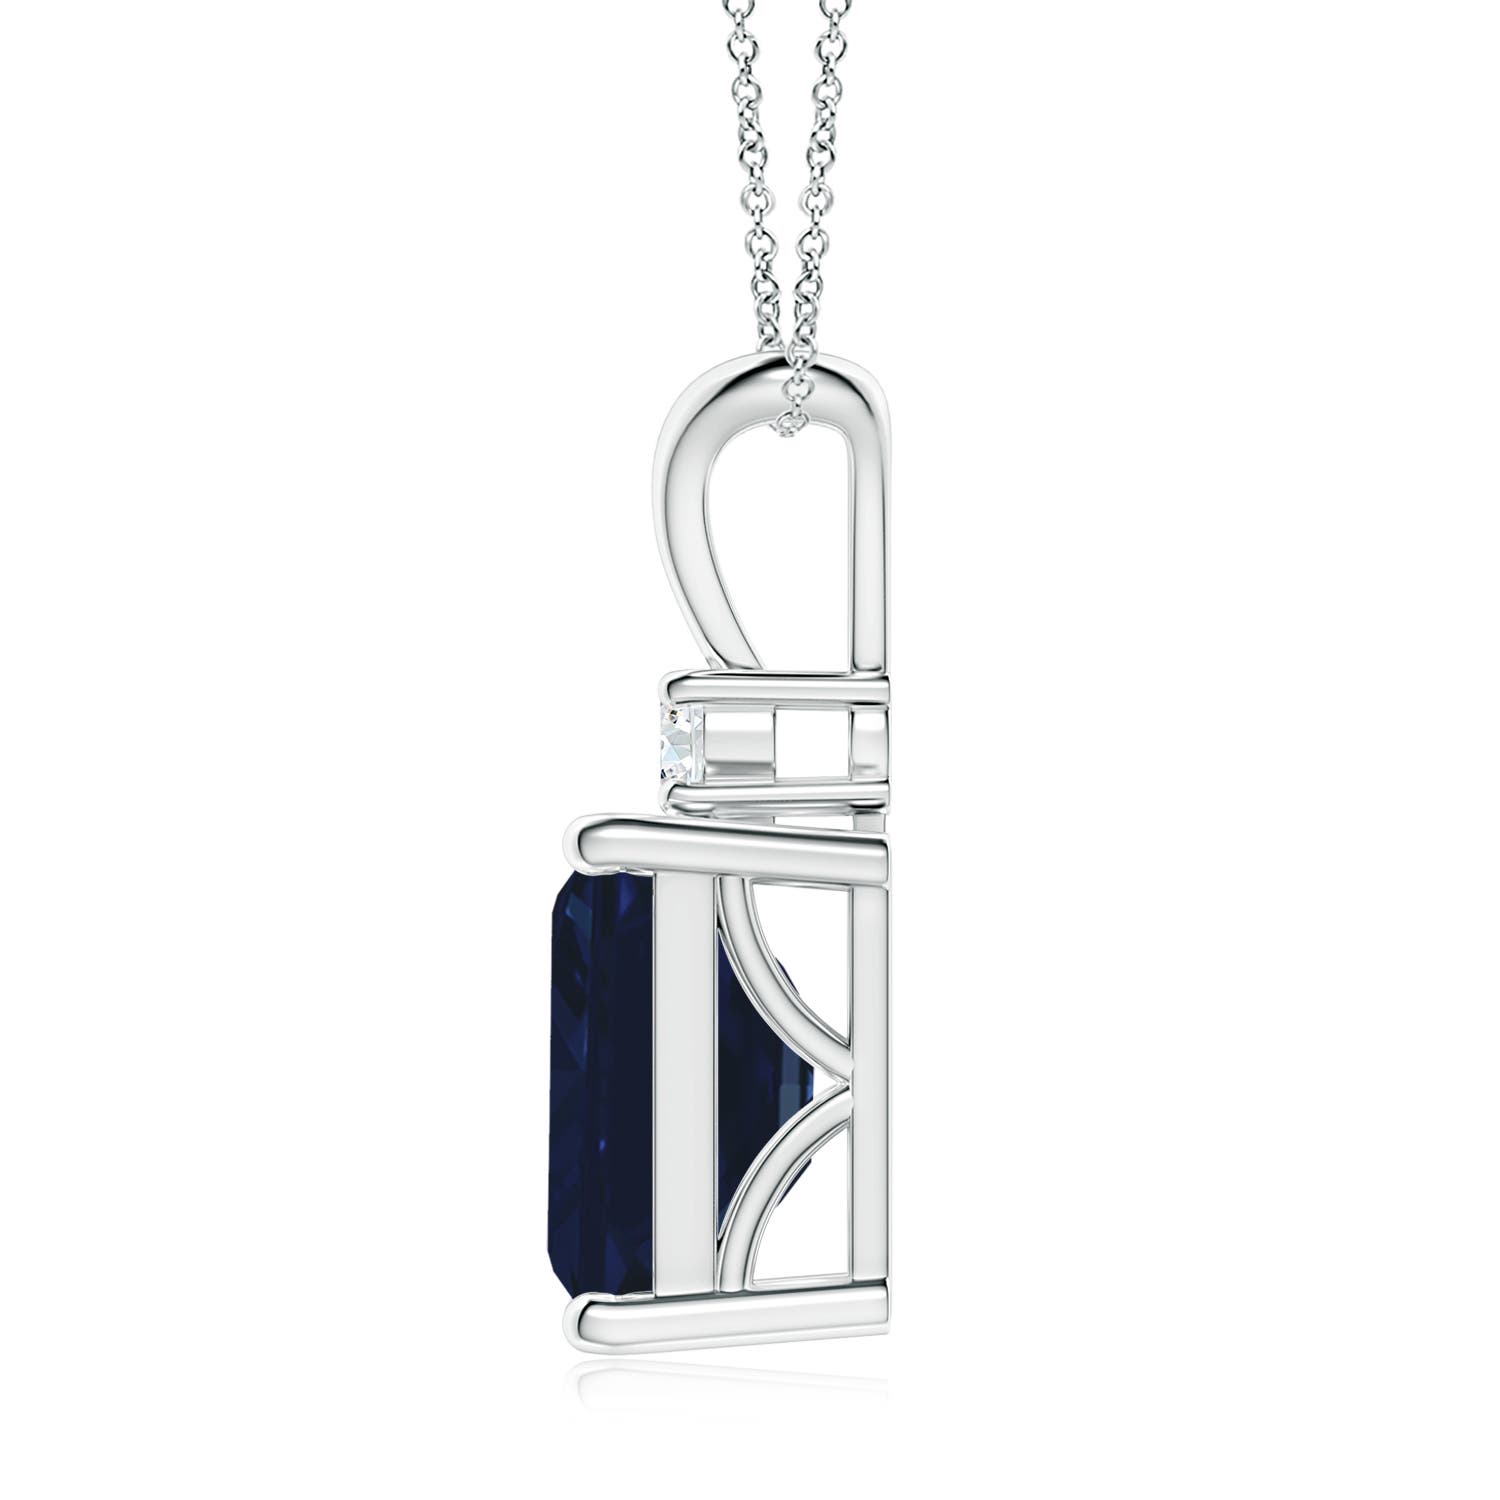 AA - Blue Sapphire / 3.51 CT / 14 KT White Gold